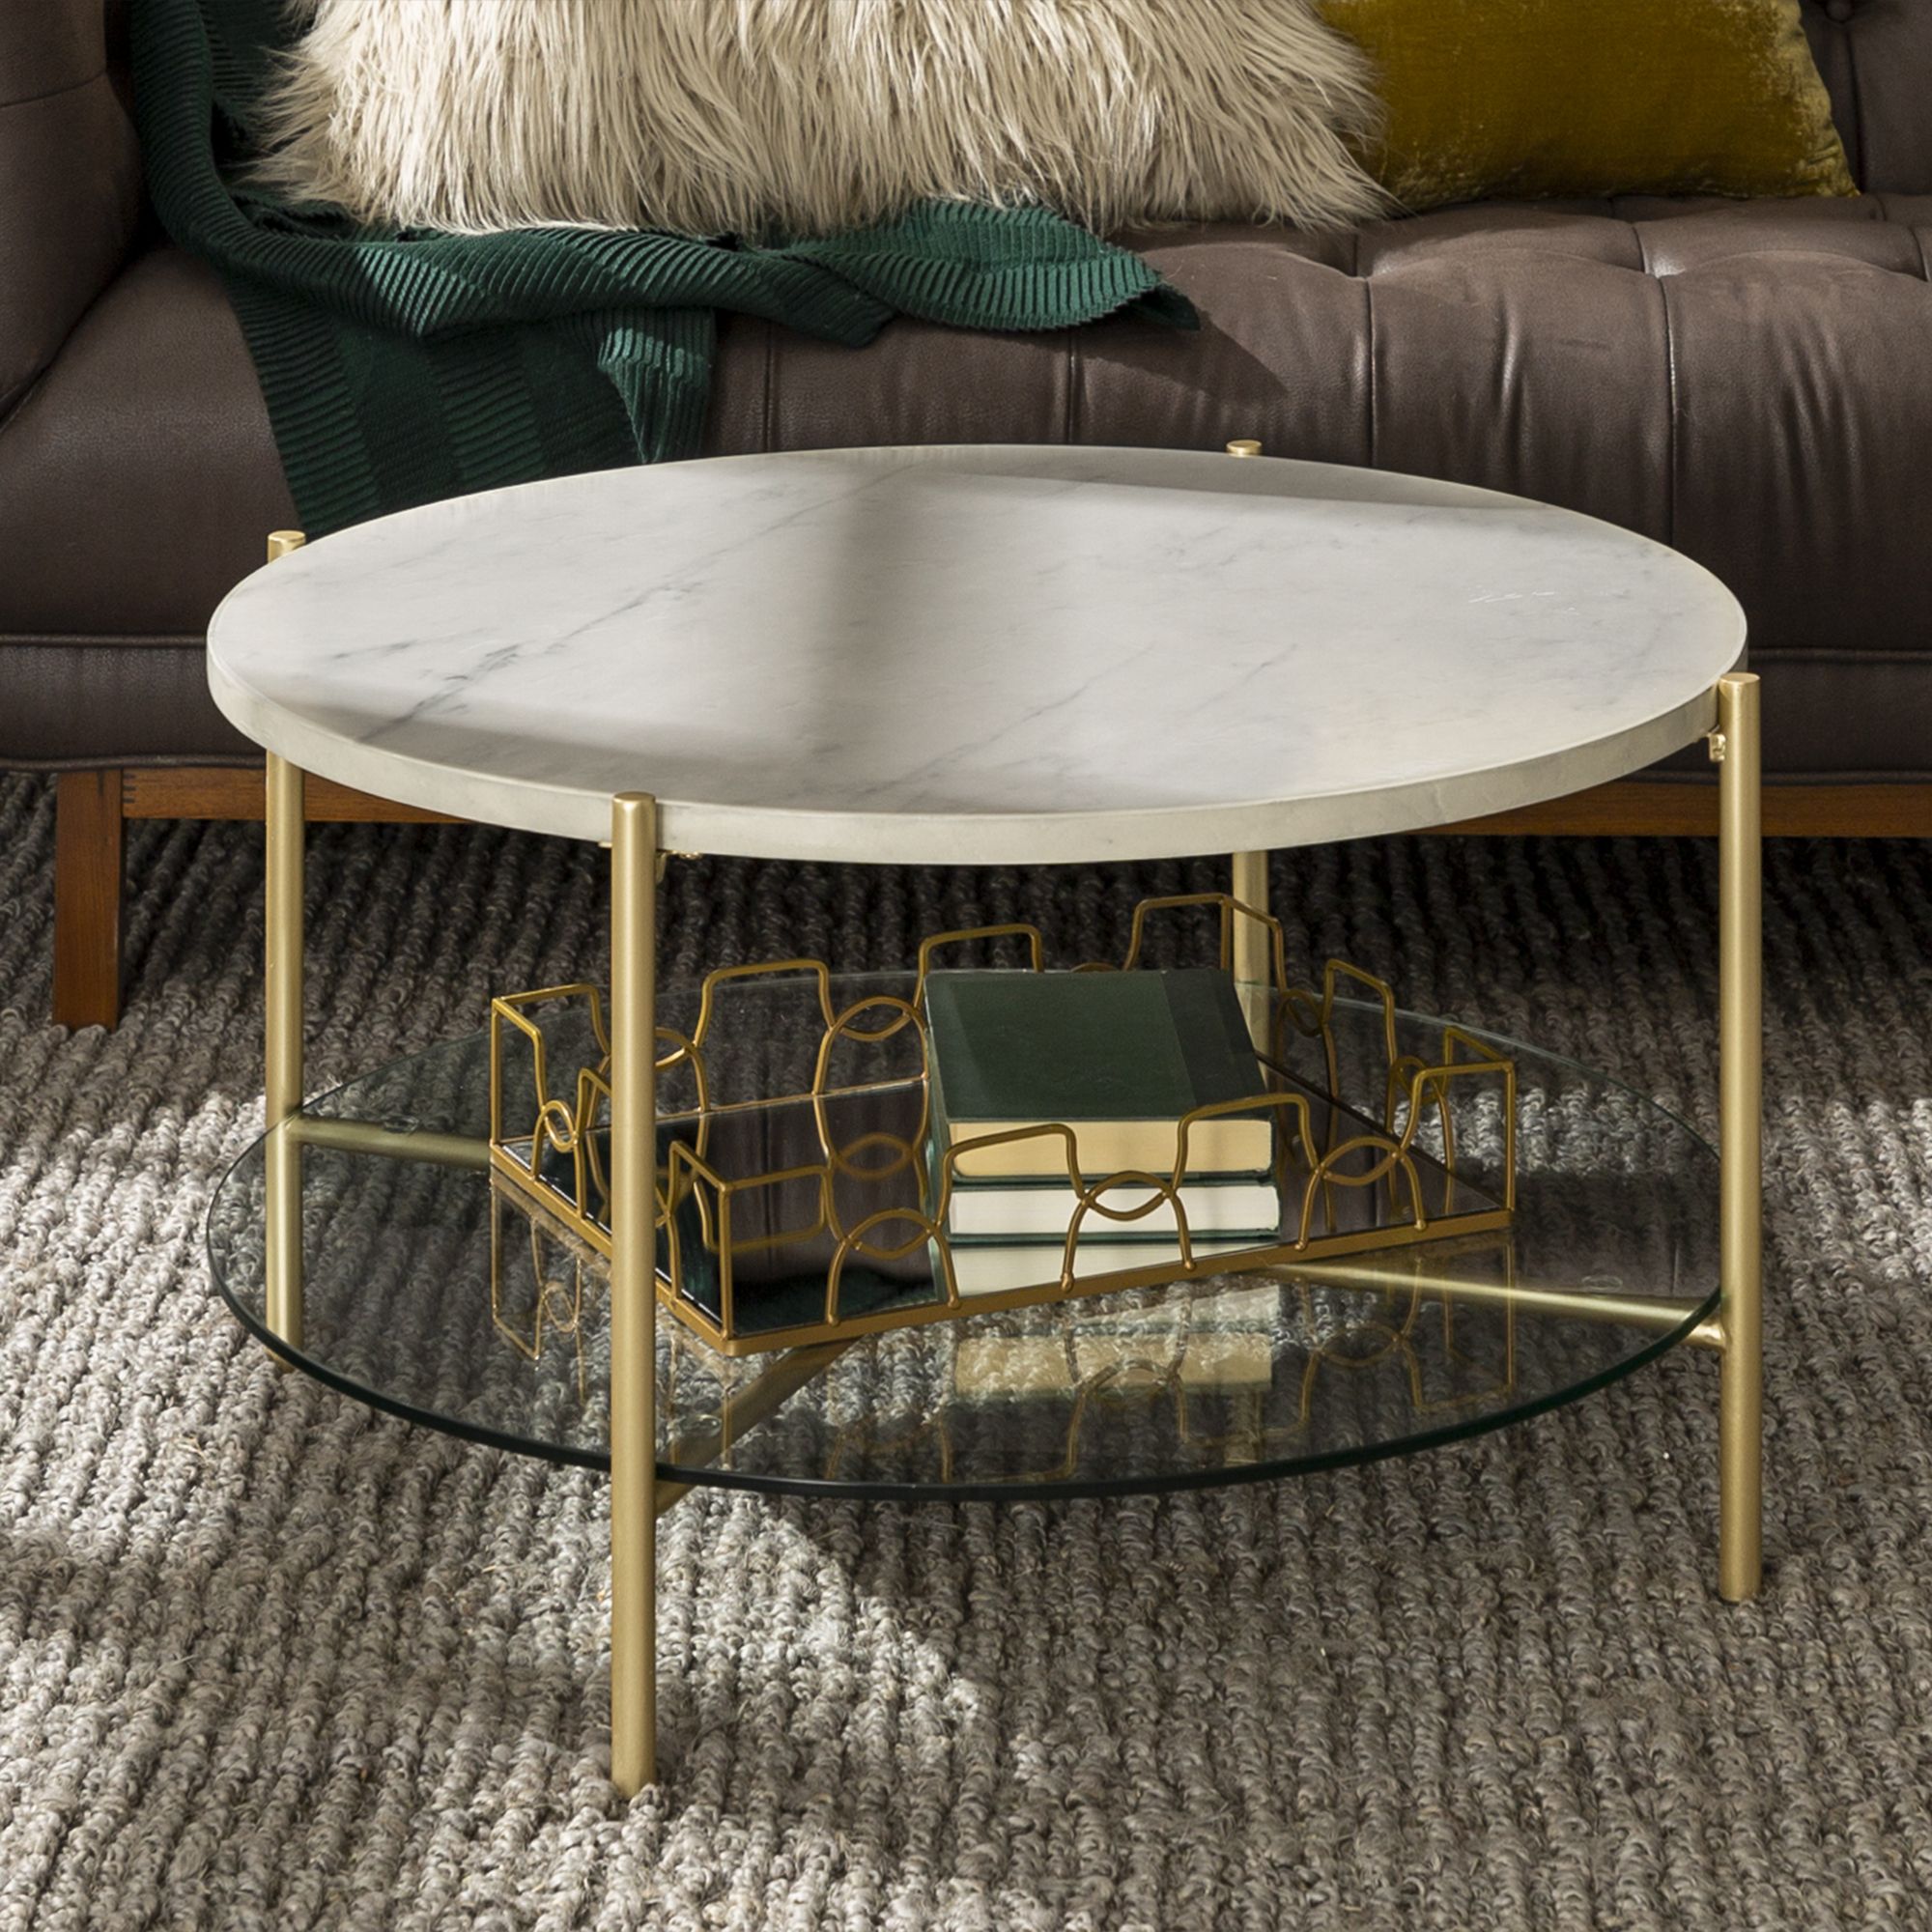 Latest White Stone Coffee Tables Regarding Manor Park Mid Century Round Coffee Table, White Marble (View 8 of 20)